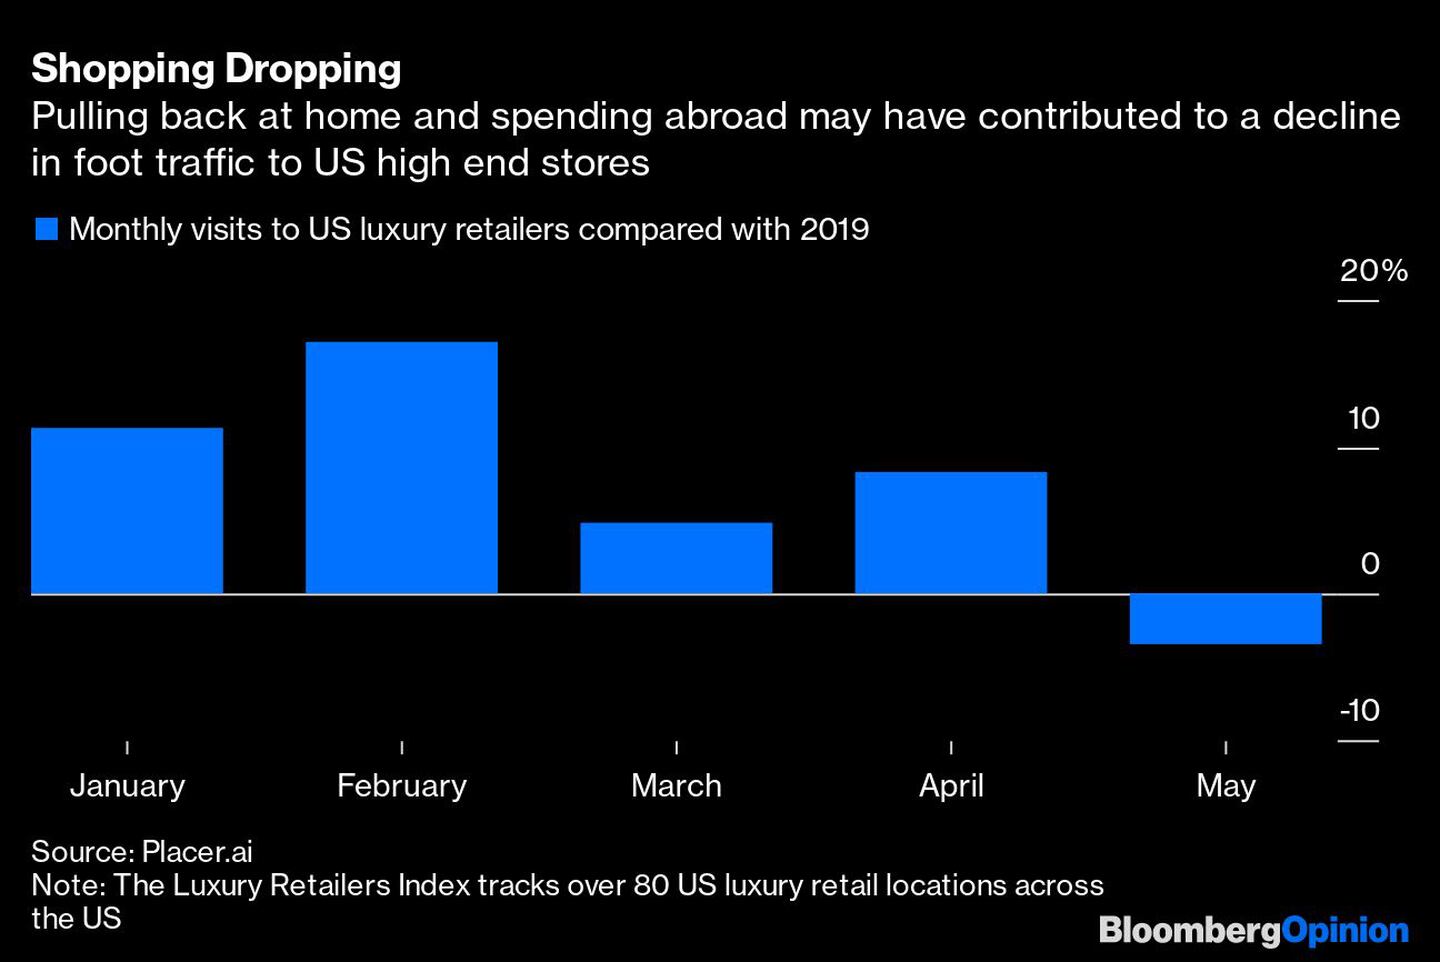 Shopping Dropping | Pulling back at home and spending abroad may have contributed to a decline in foot traffic to US high end storesdfd